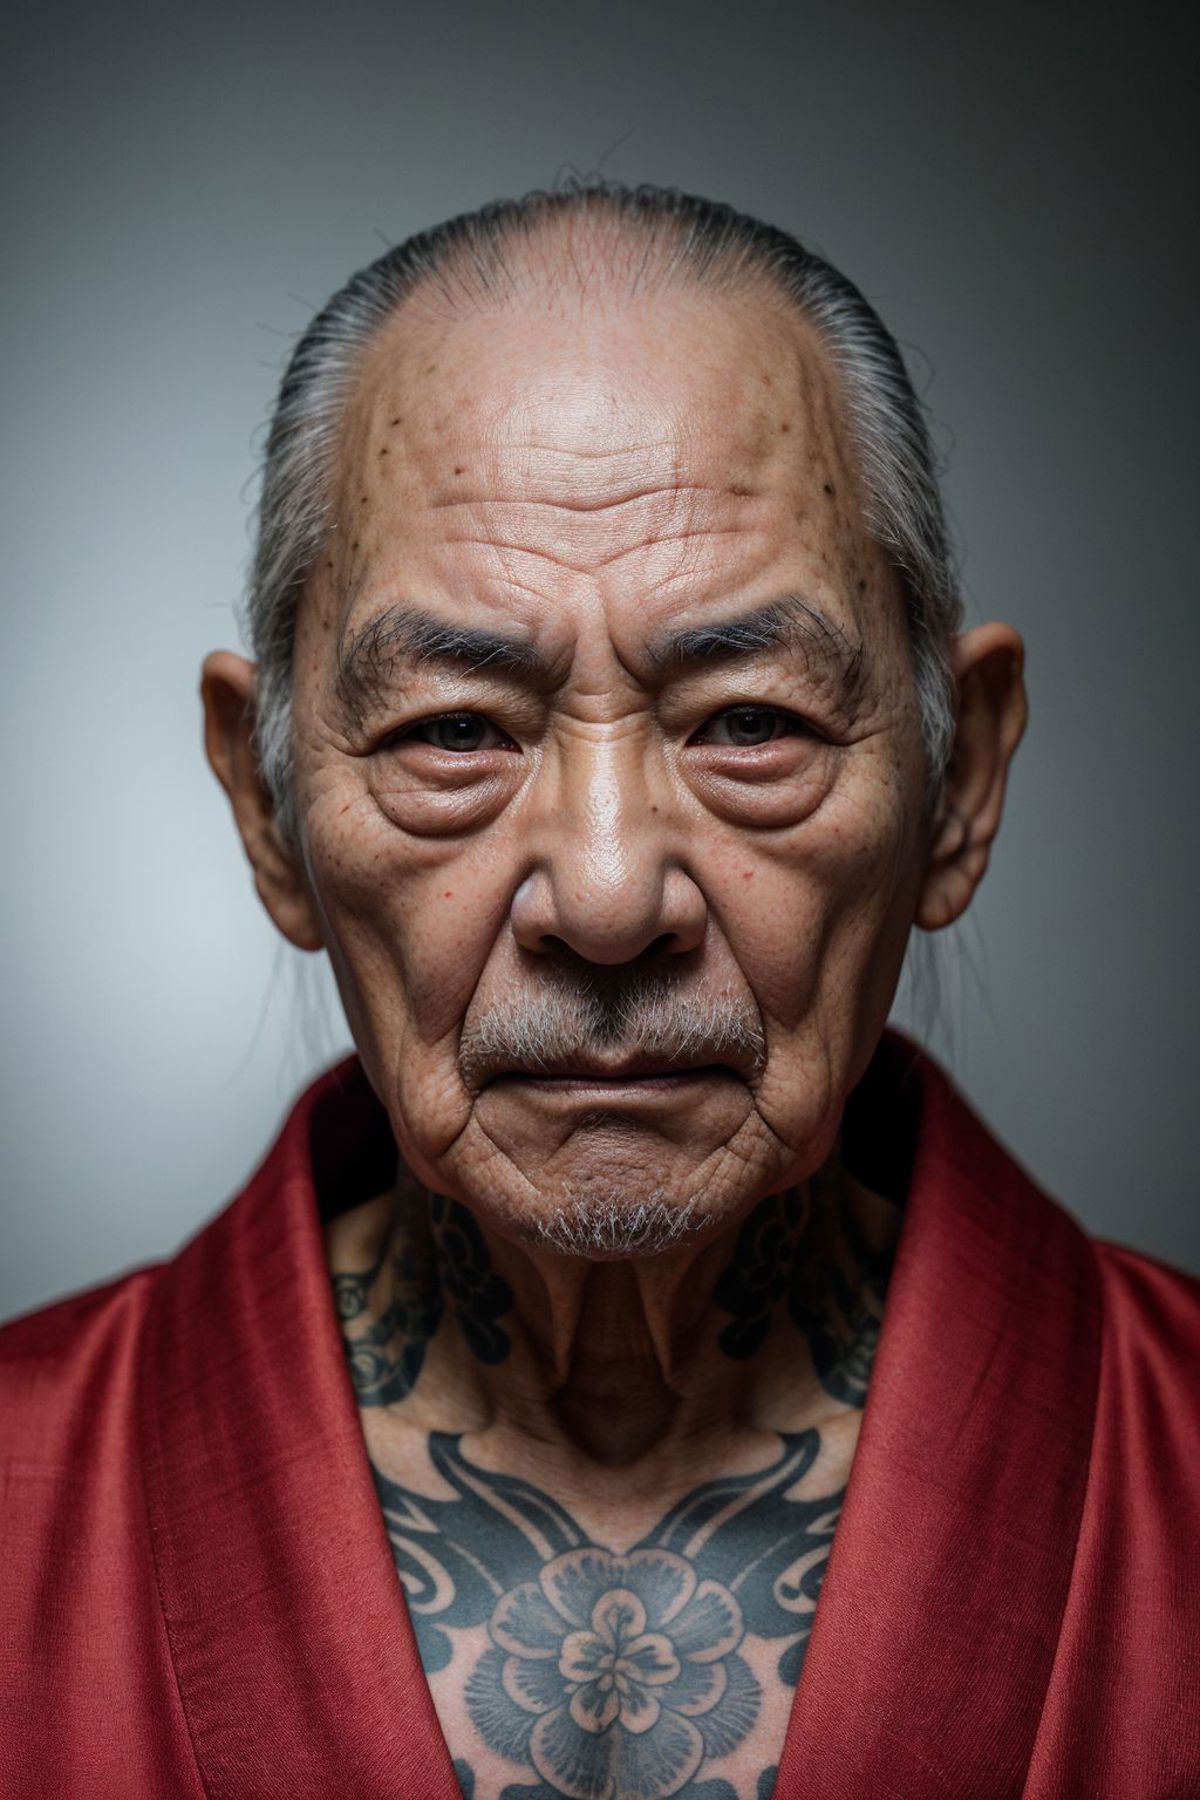 Old man with long hair and tattoos wearing a red robe.